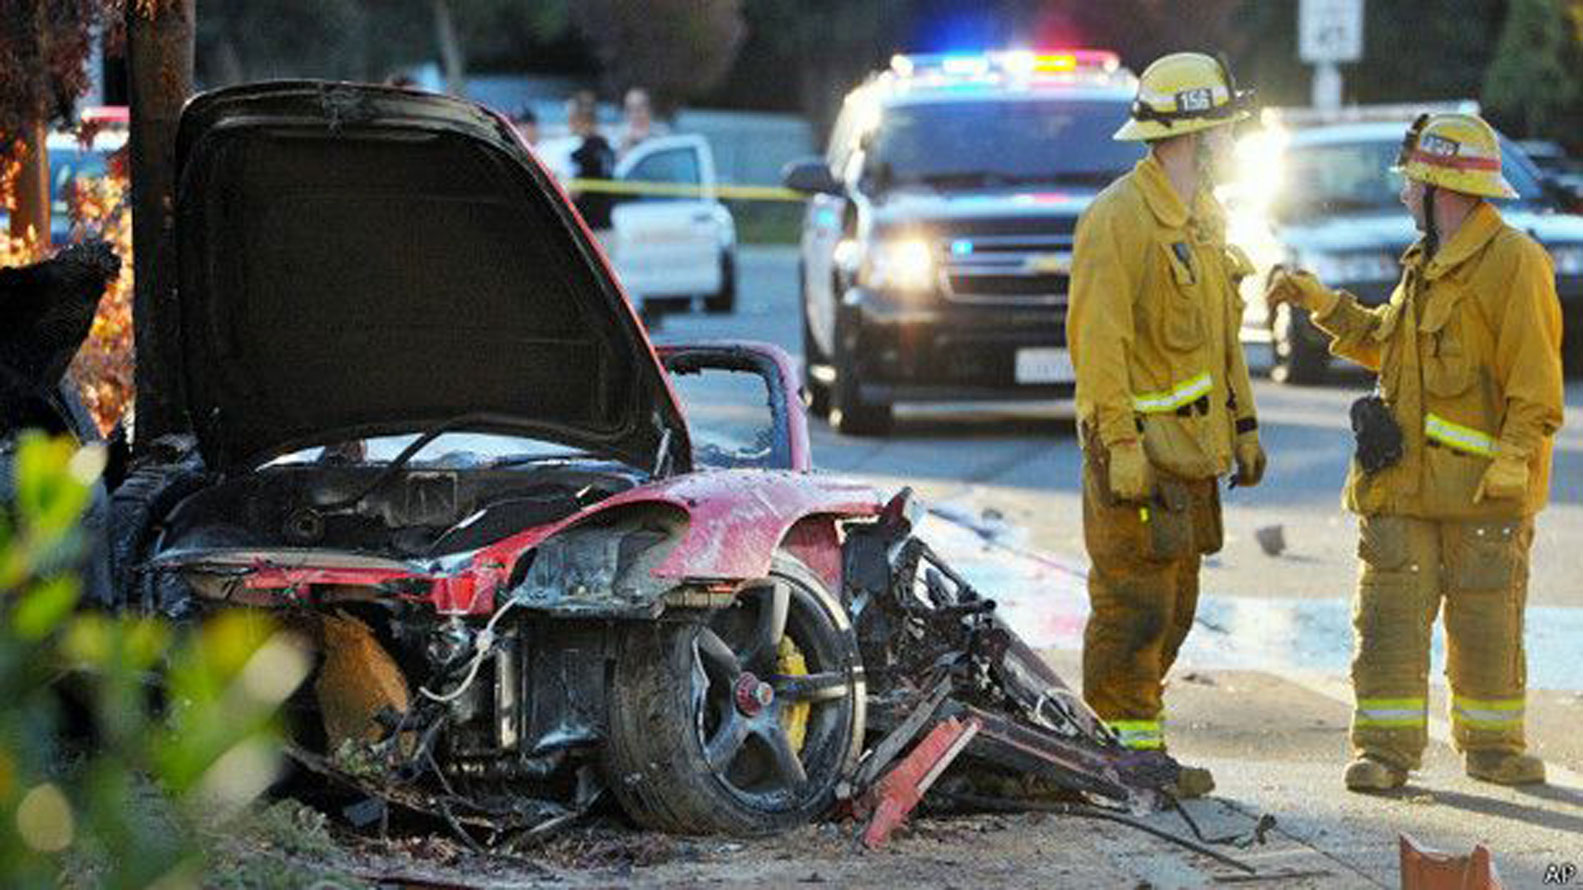 This is what was left of Paul Walker's car after the accident (Photo: Getty Images) 